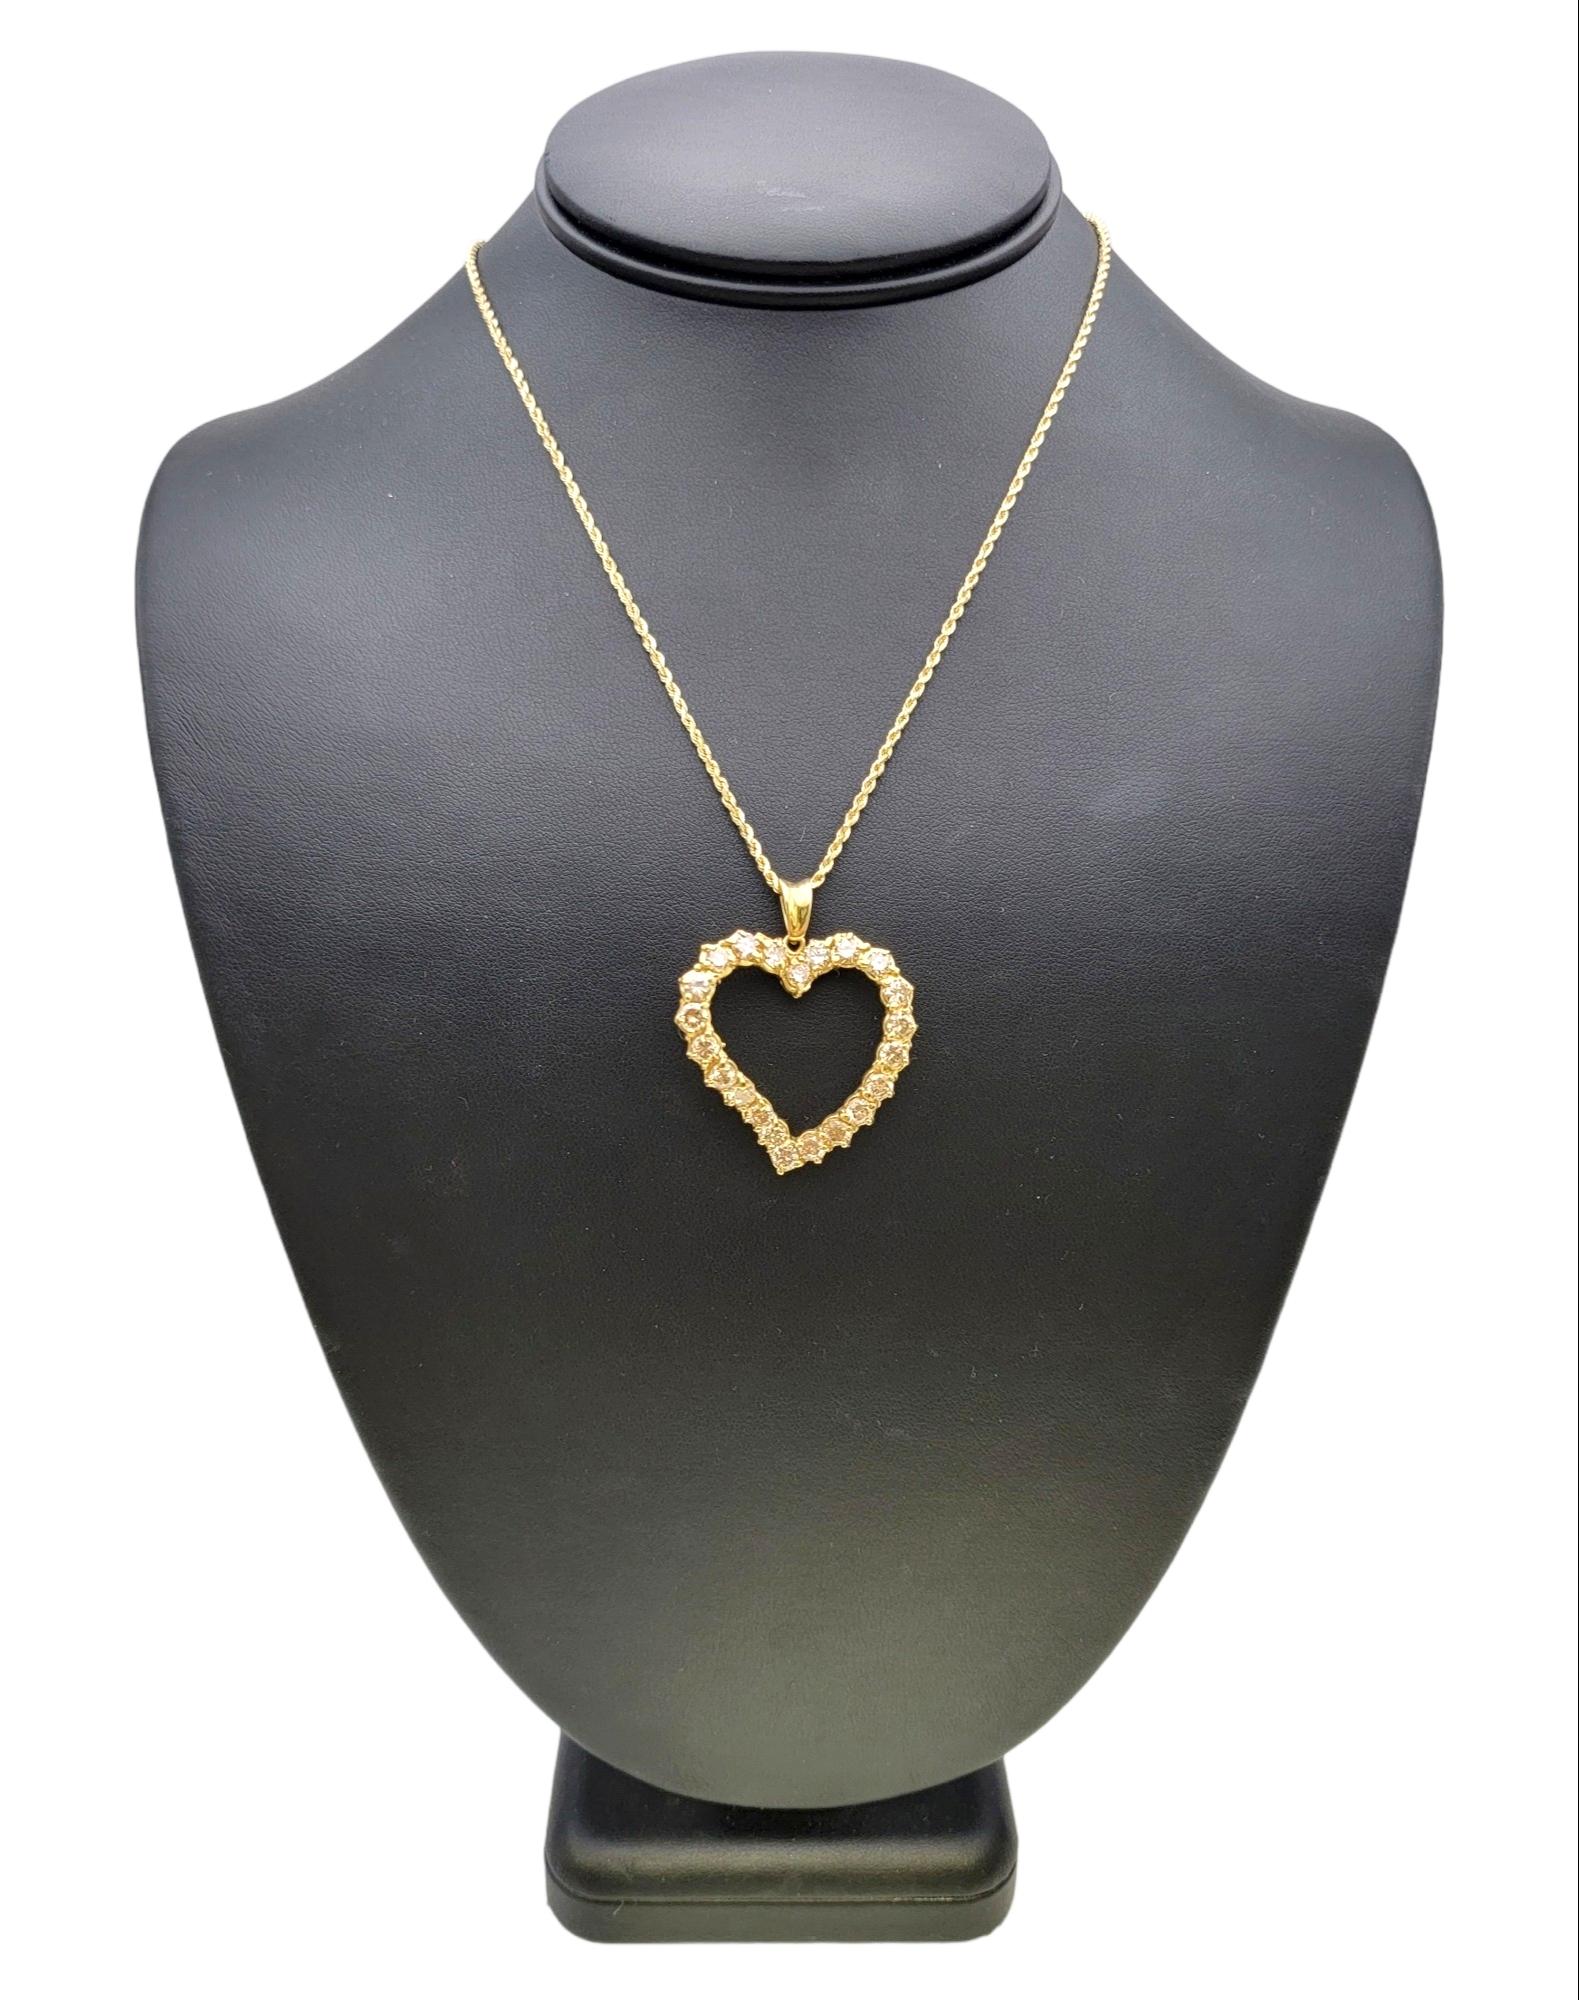 4.25 Carats Champagne Diamond Curved Open Heart Pendant in 14 Karat Yellow Gold 7